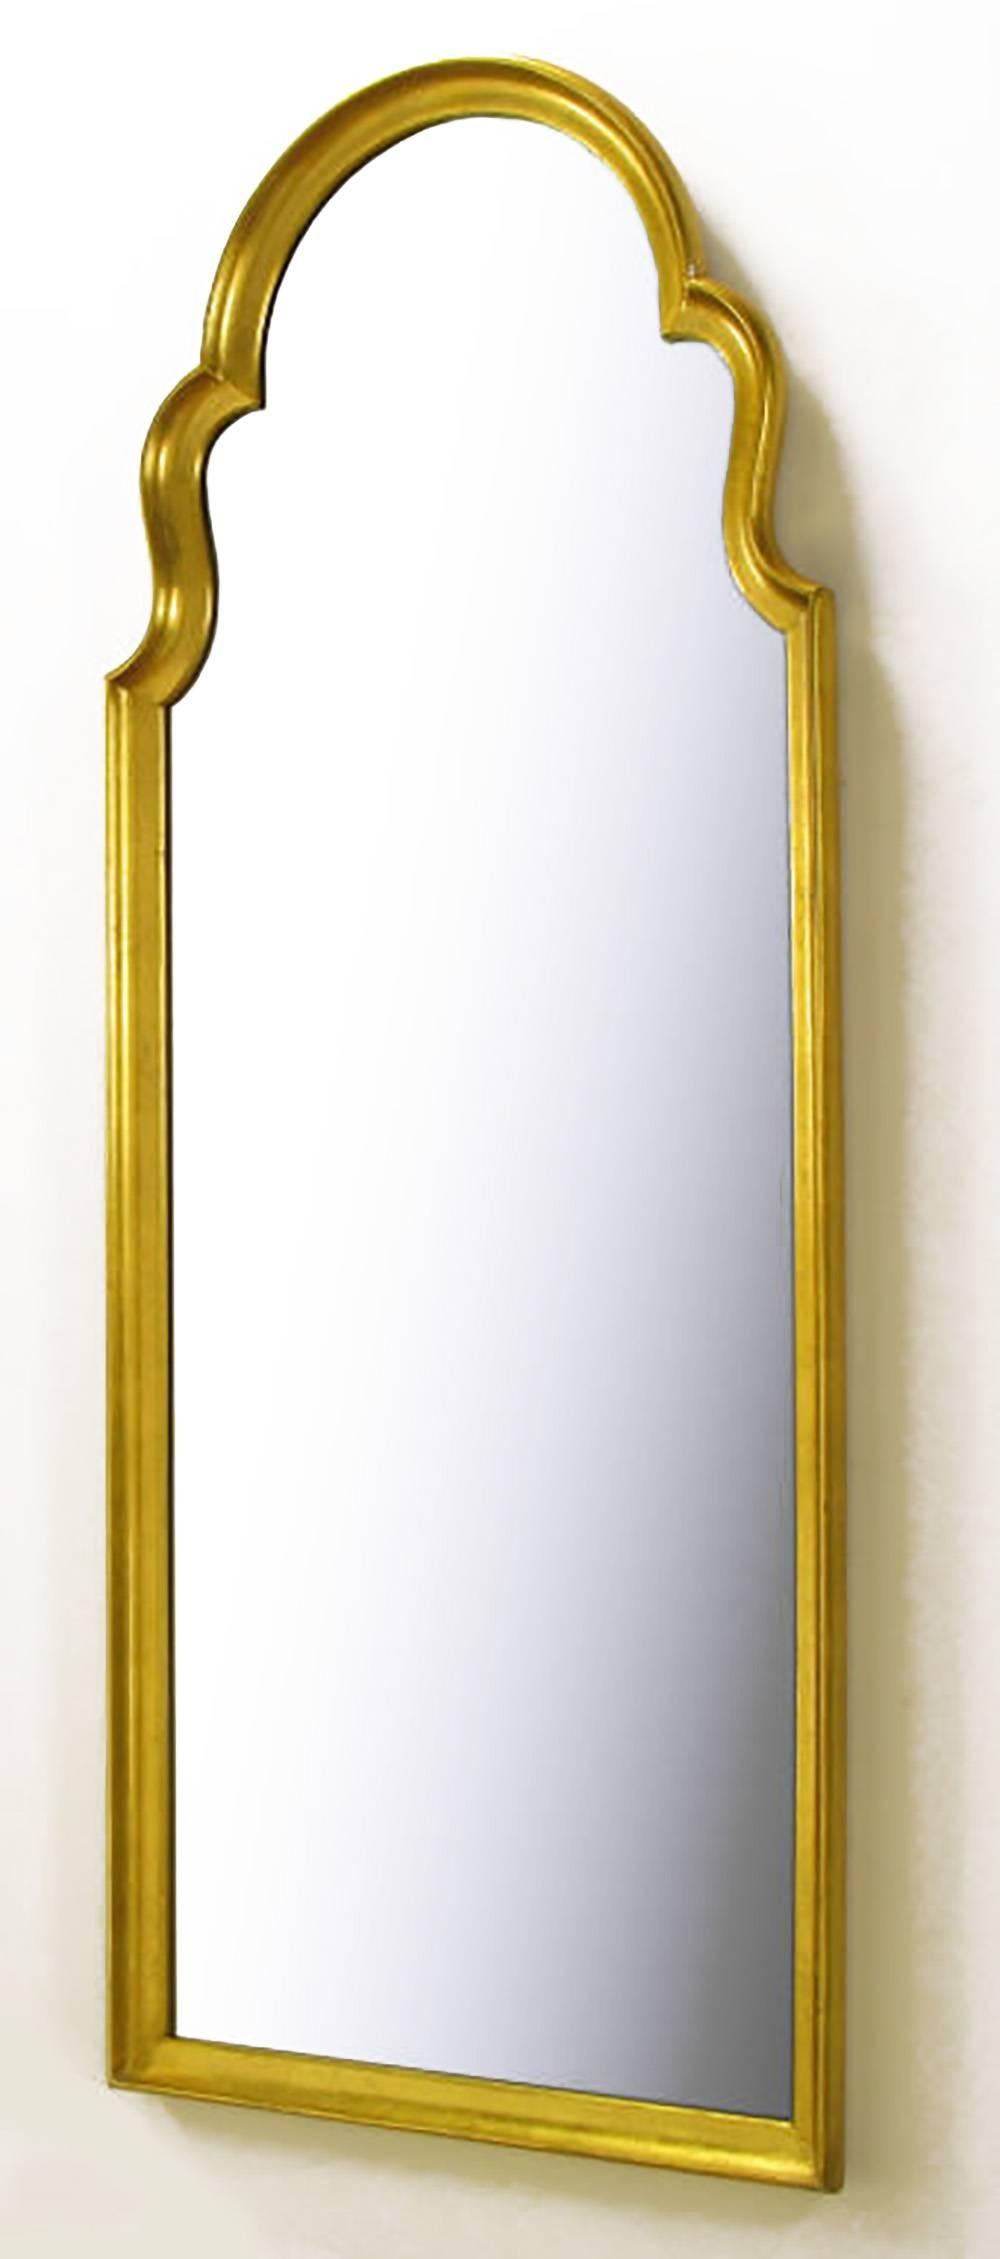 With Moorish styling and aged gilt finish, this wall mirror would greatly complement a console table, or work as a beautiful powder room mirror. 62